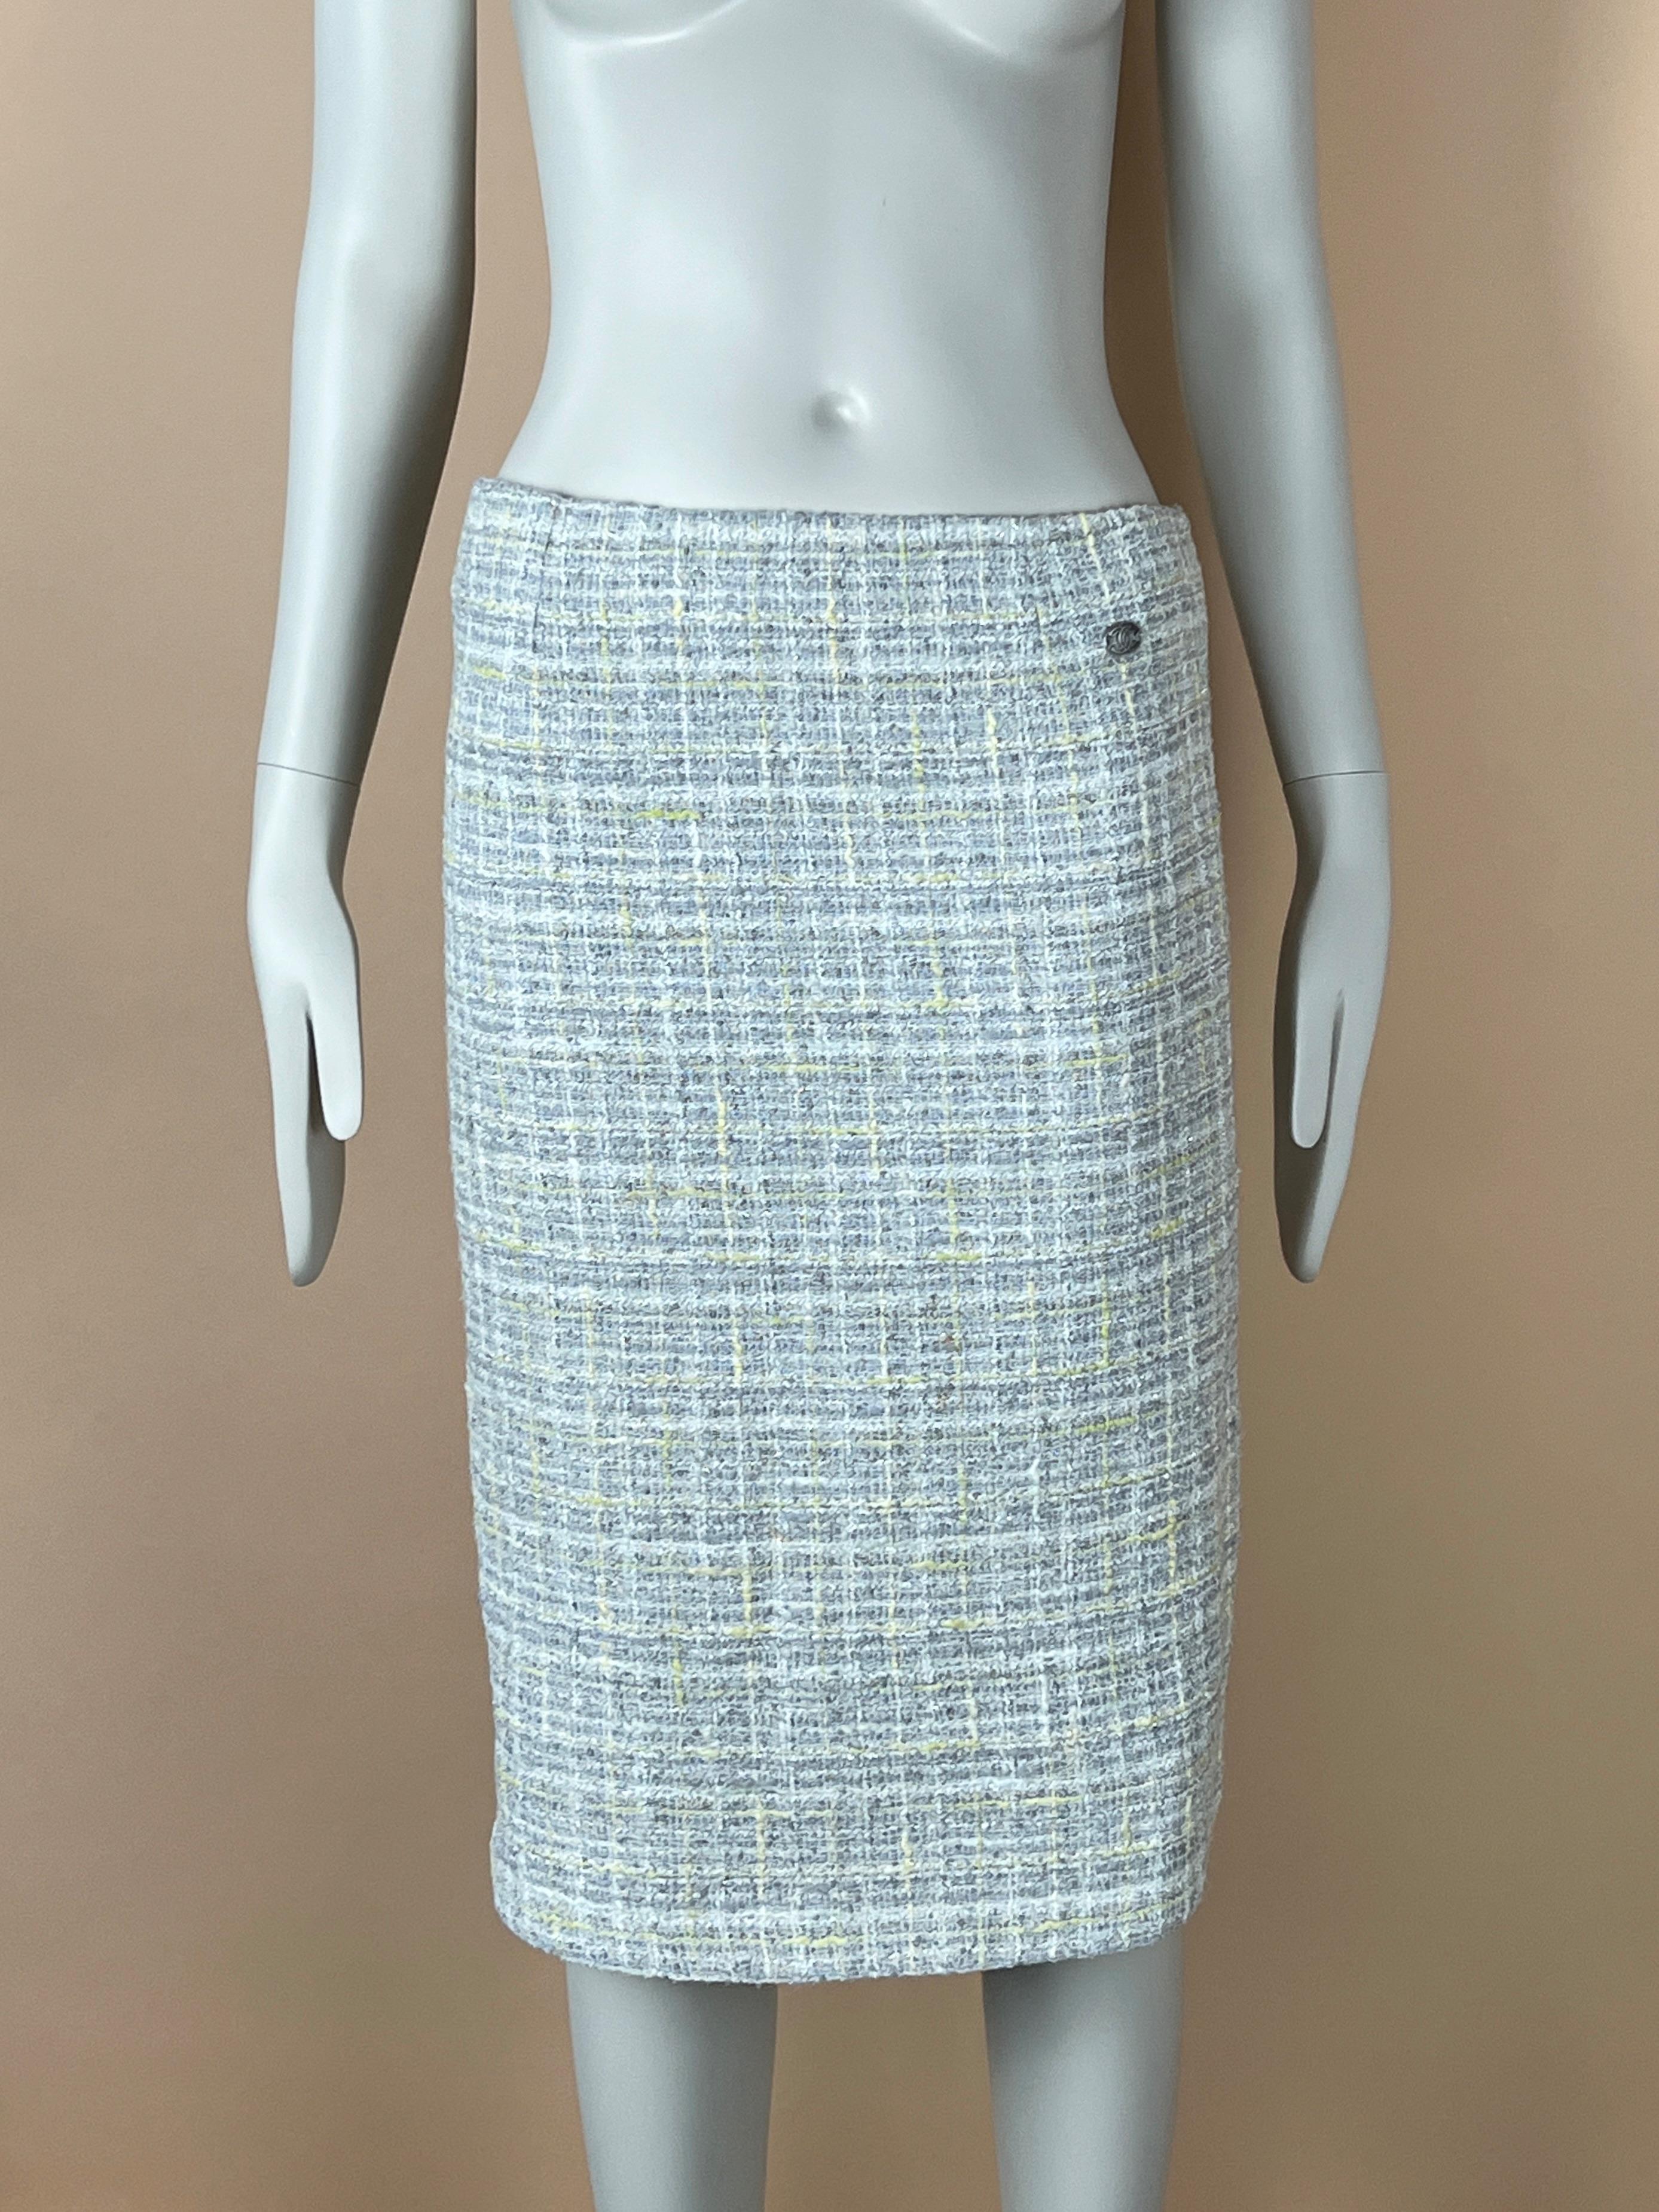 Chanel London Collection Lesage Tweed Skirt In New Condition For Sale In Dubai, AE